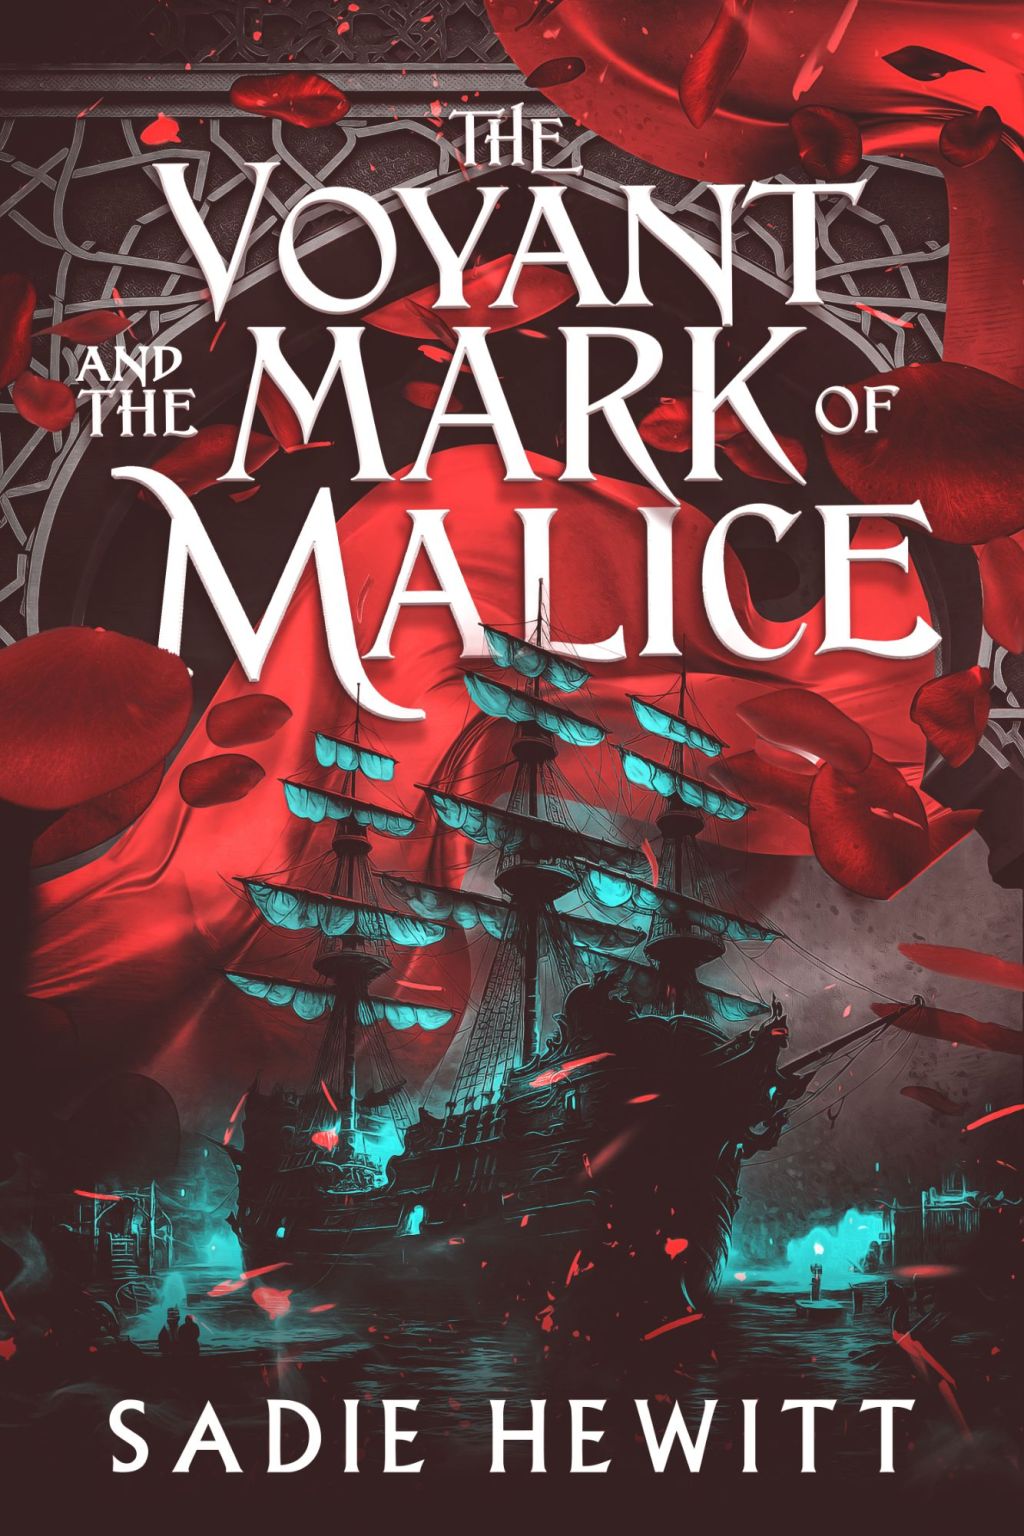 The Voyent and the Mark of Malice Tour Review Plus Giveaway